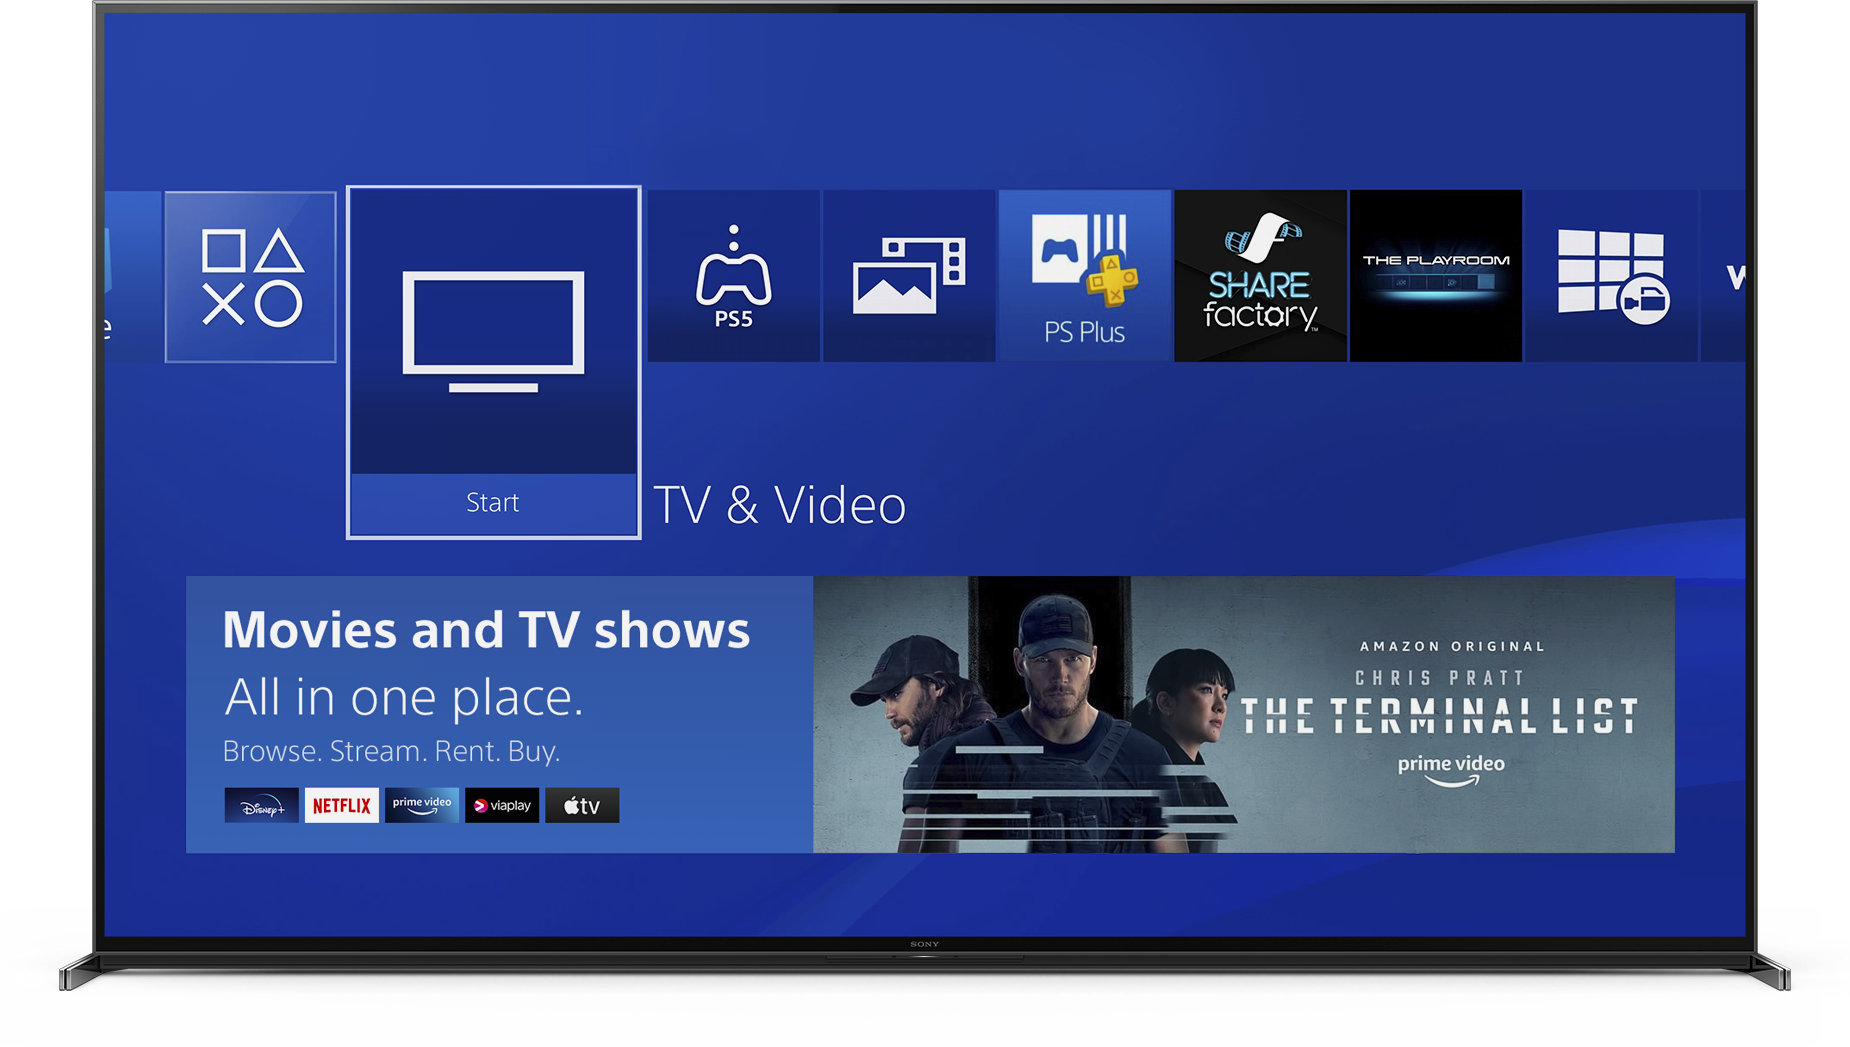 Television screen showing the user interface of the PS4